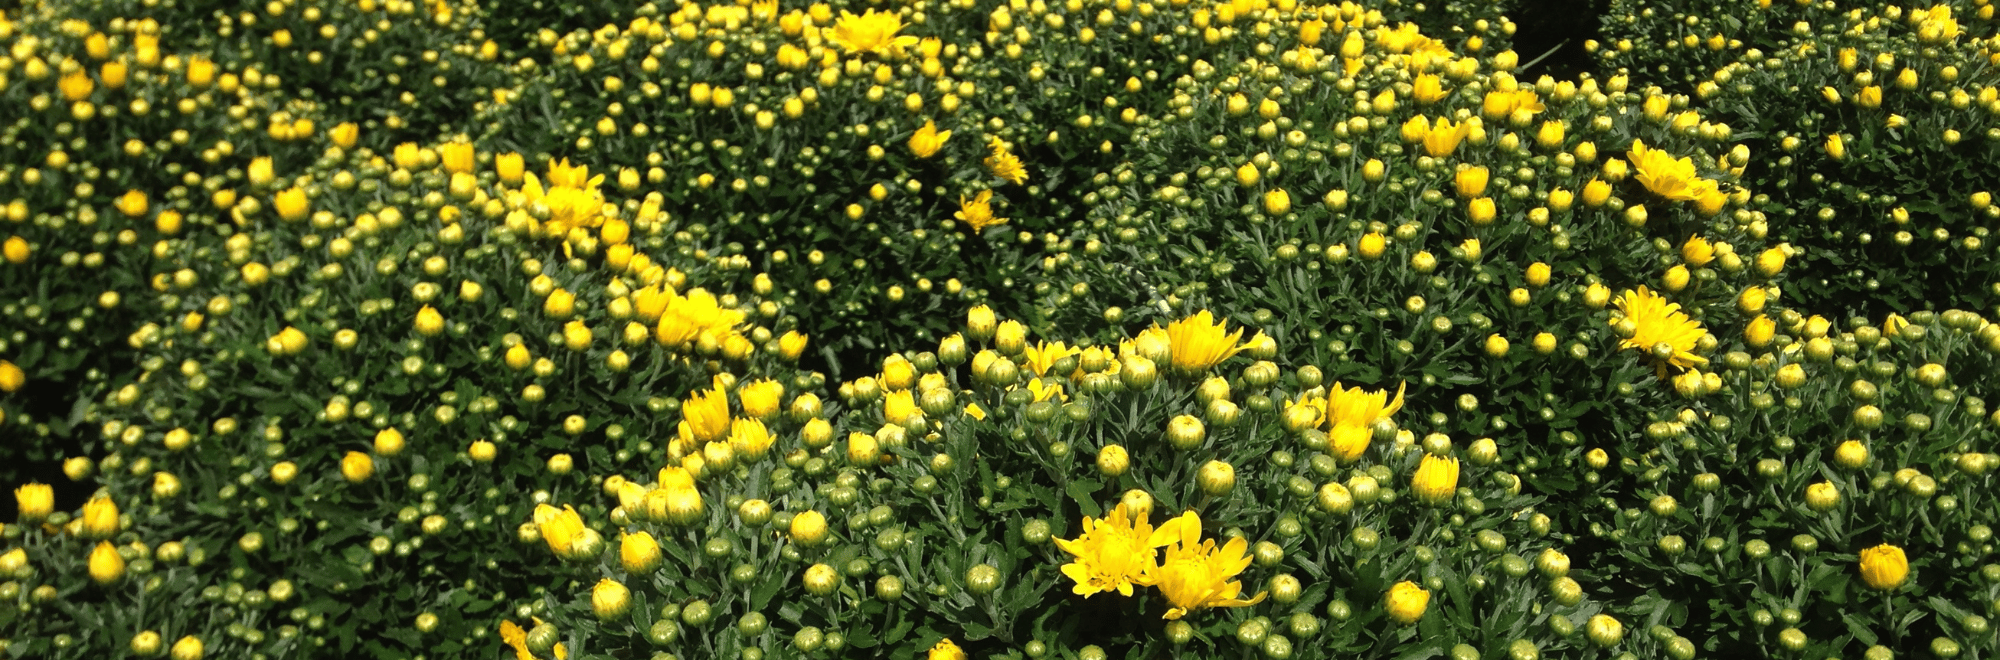 yellow mums starting to bloom on green plant